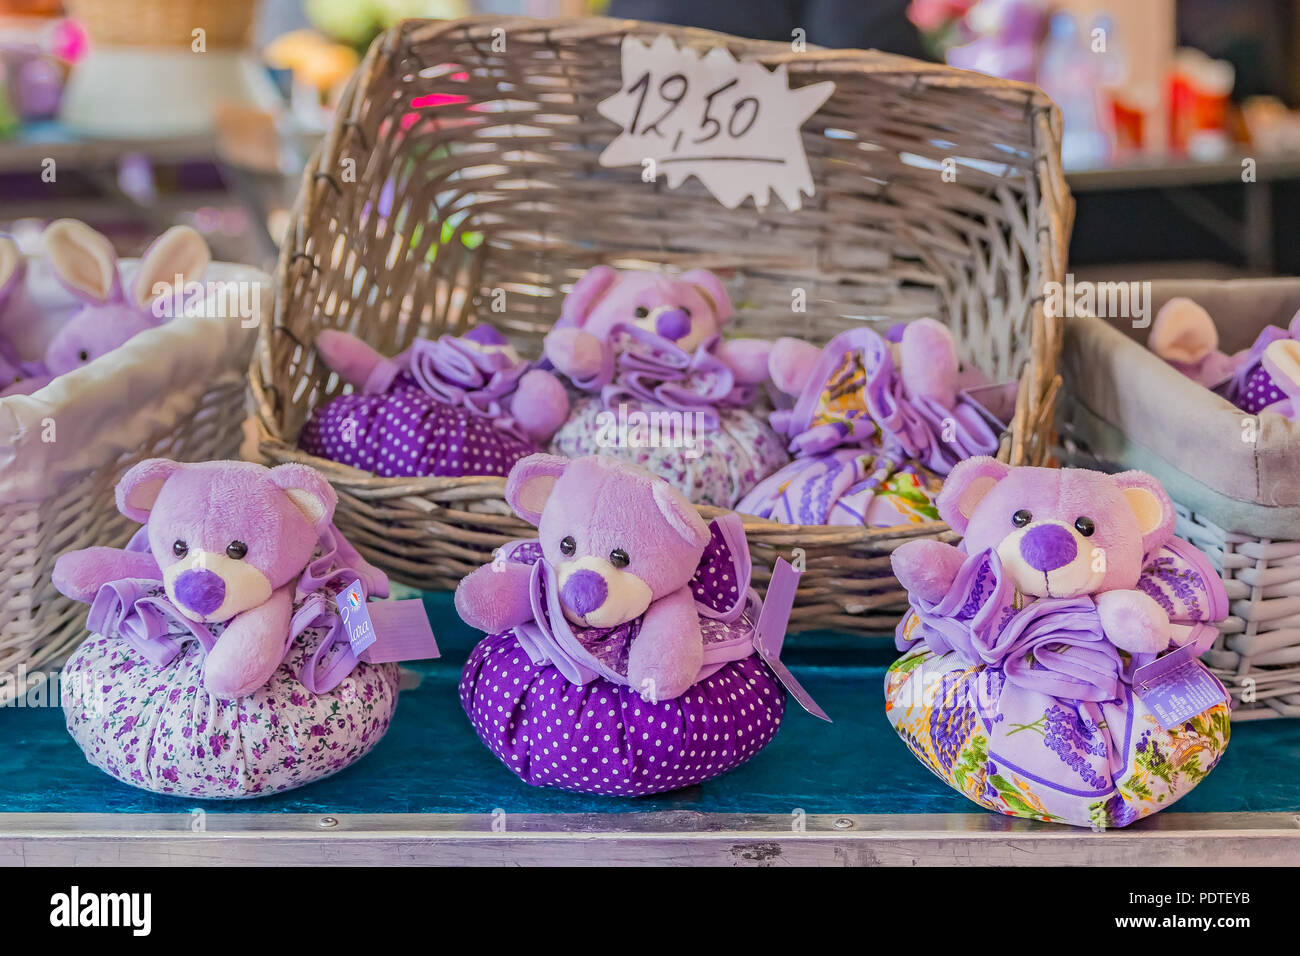 Colorful decorative sachets shaped like teddy bear toys filled with lavender at market at a market in Nice in the South of France Stock Photo